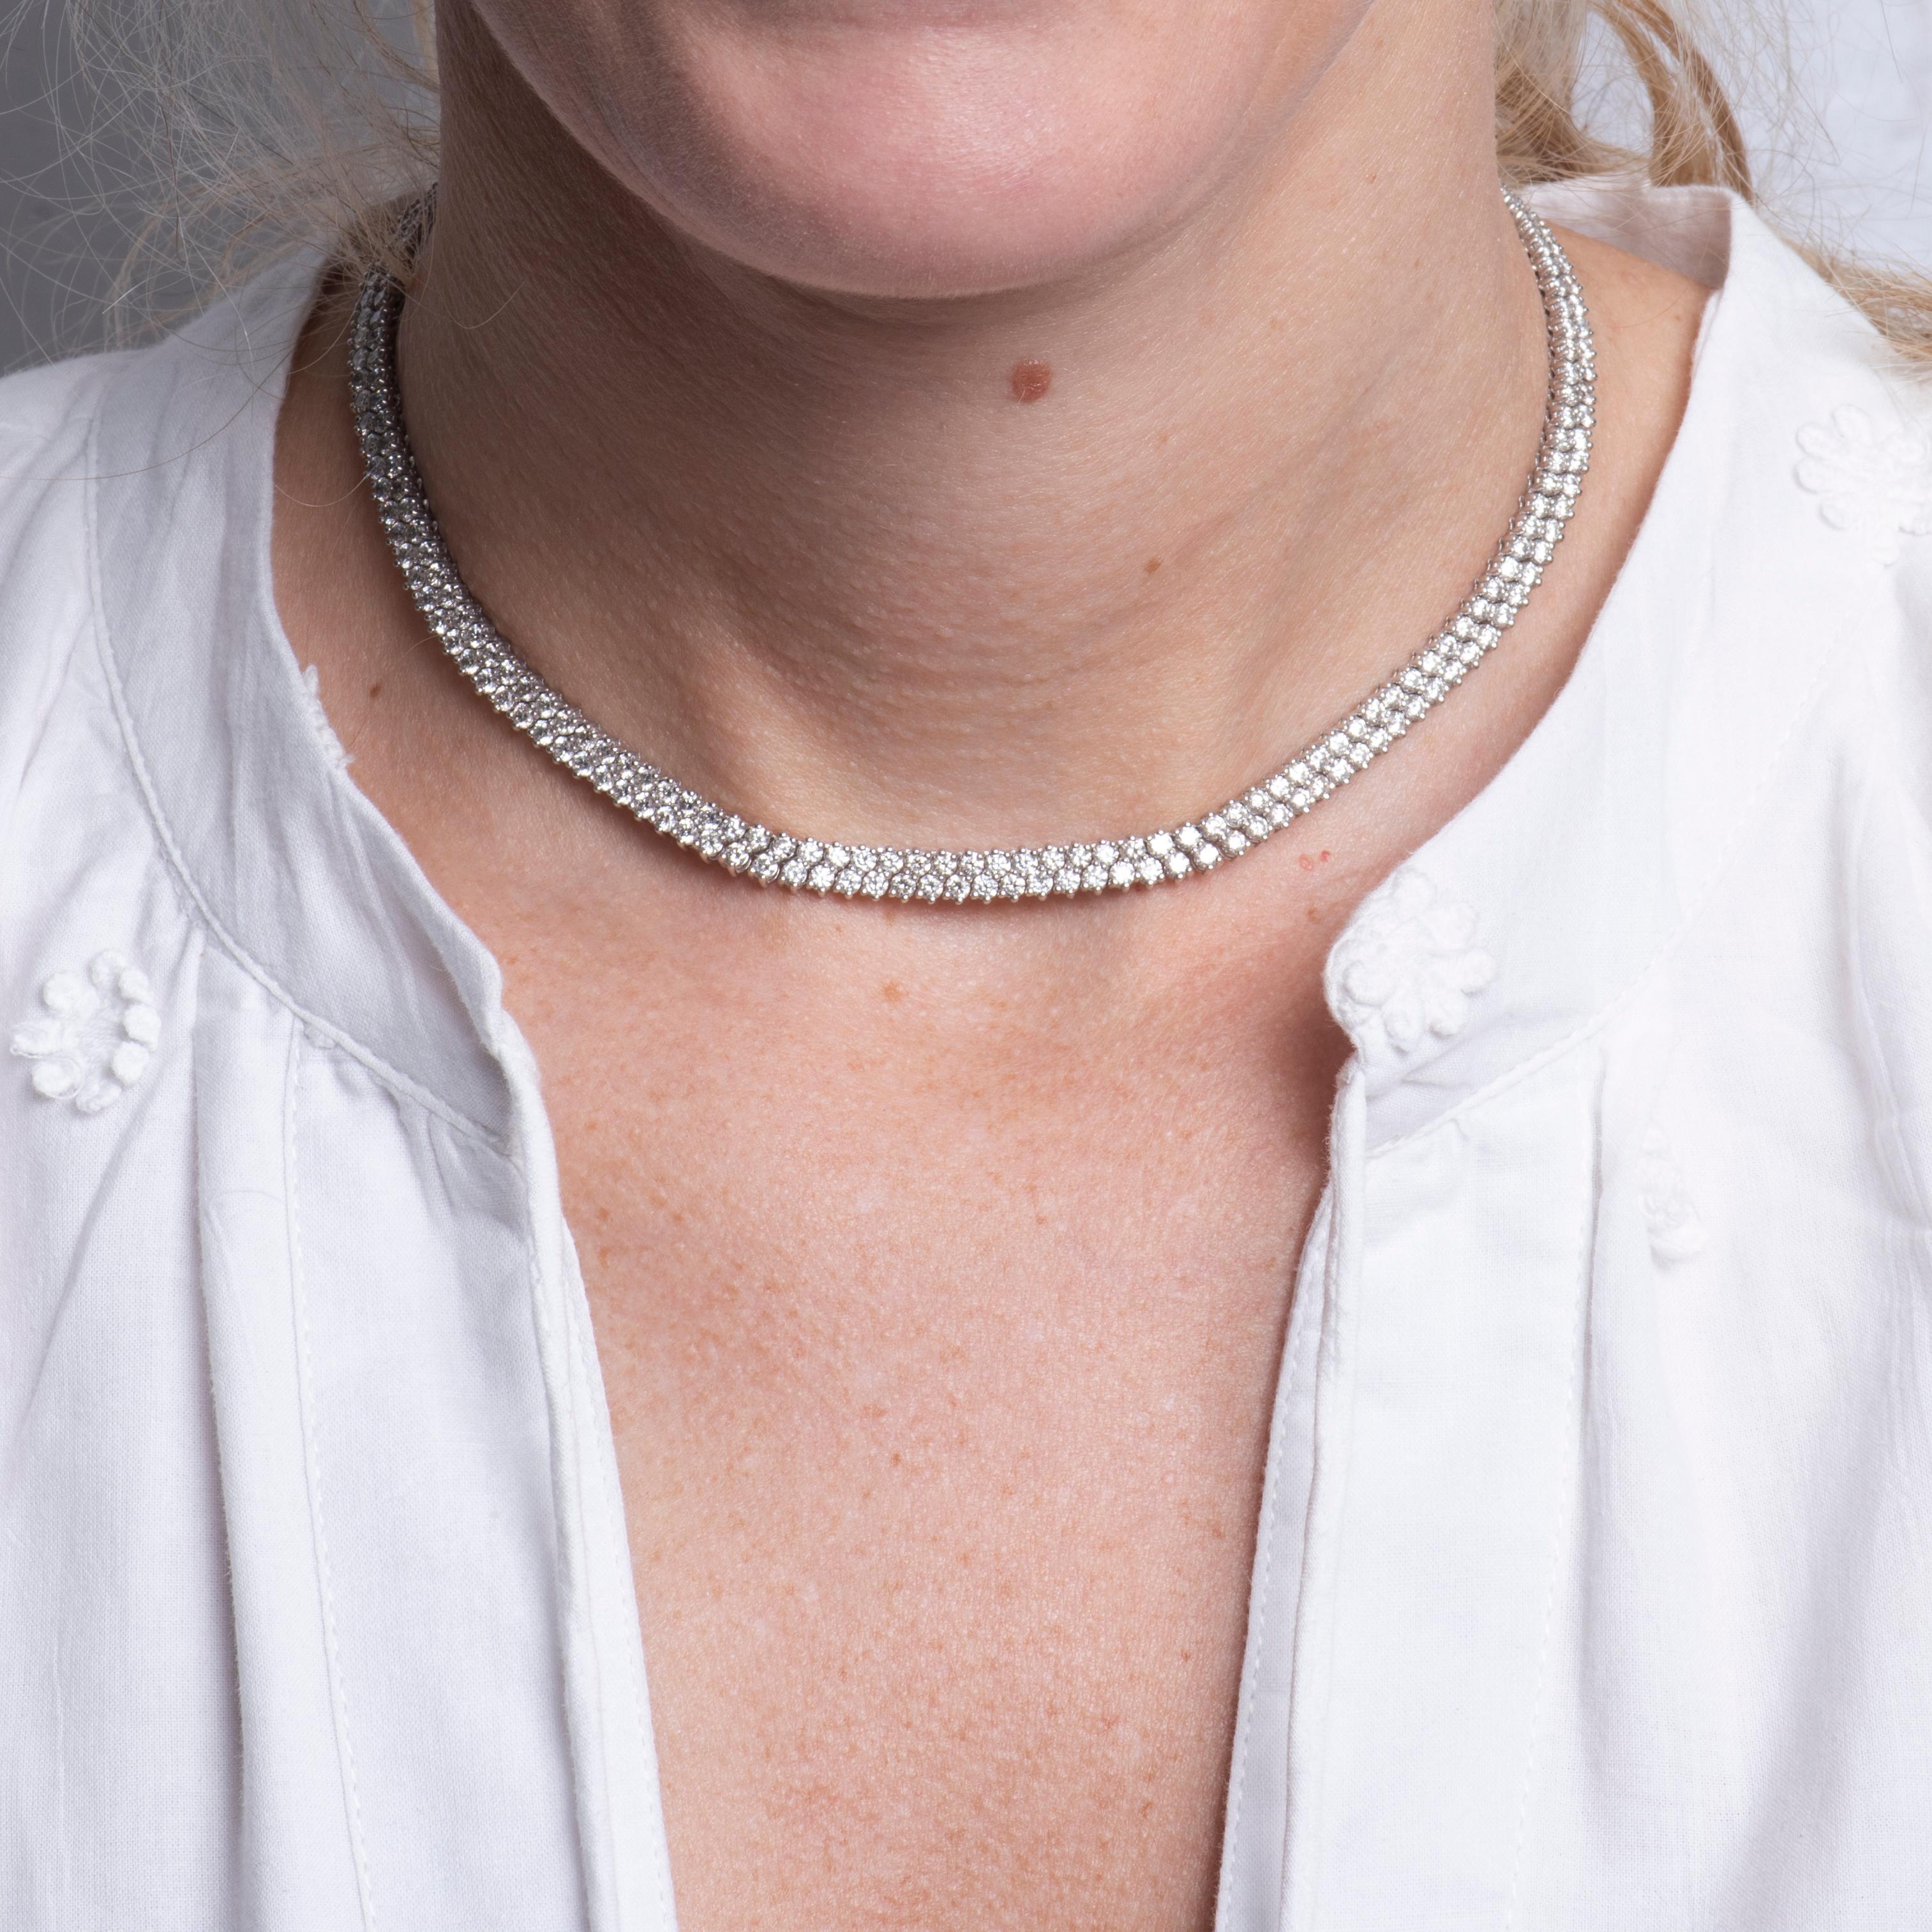 This adjustable choker necklace features 10.13 carat total weight in round brilliant cut natural diamonds set in two rows in 14 karat white gold. Wear alone or layer with your other favorite necklaces and wear at whichever length you desire. This